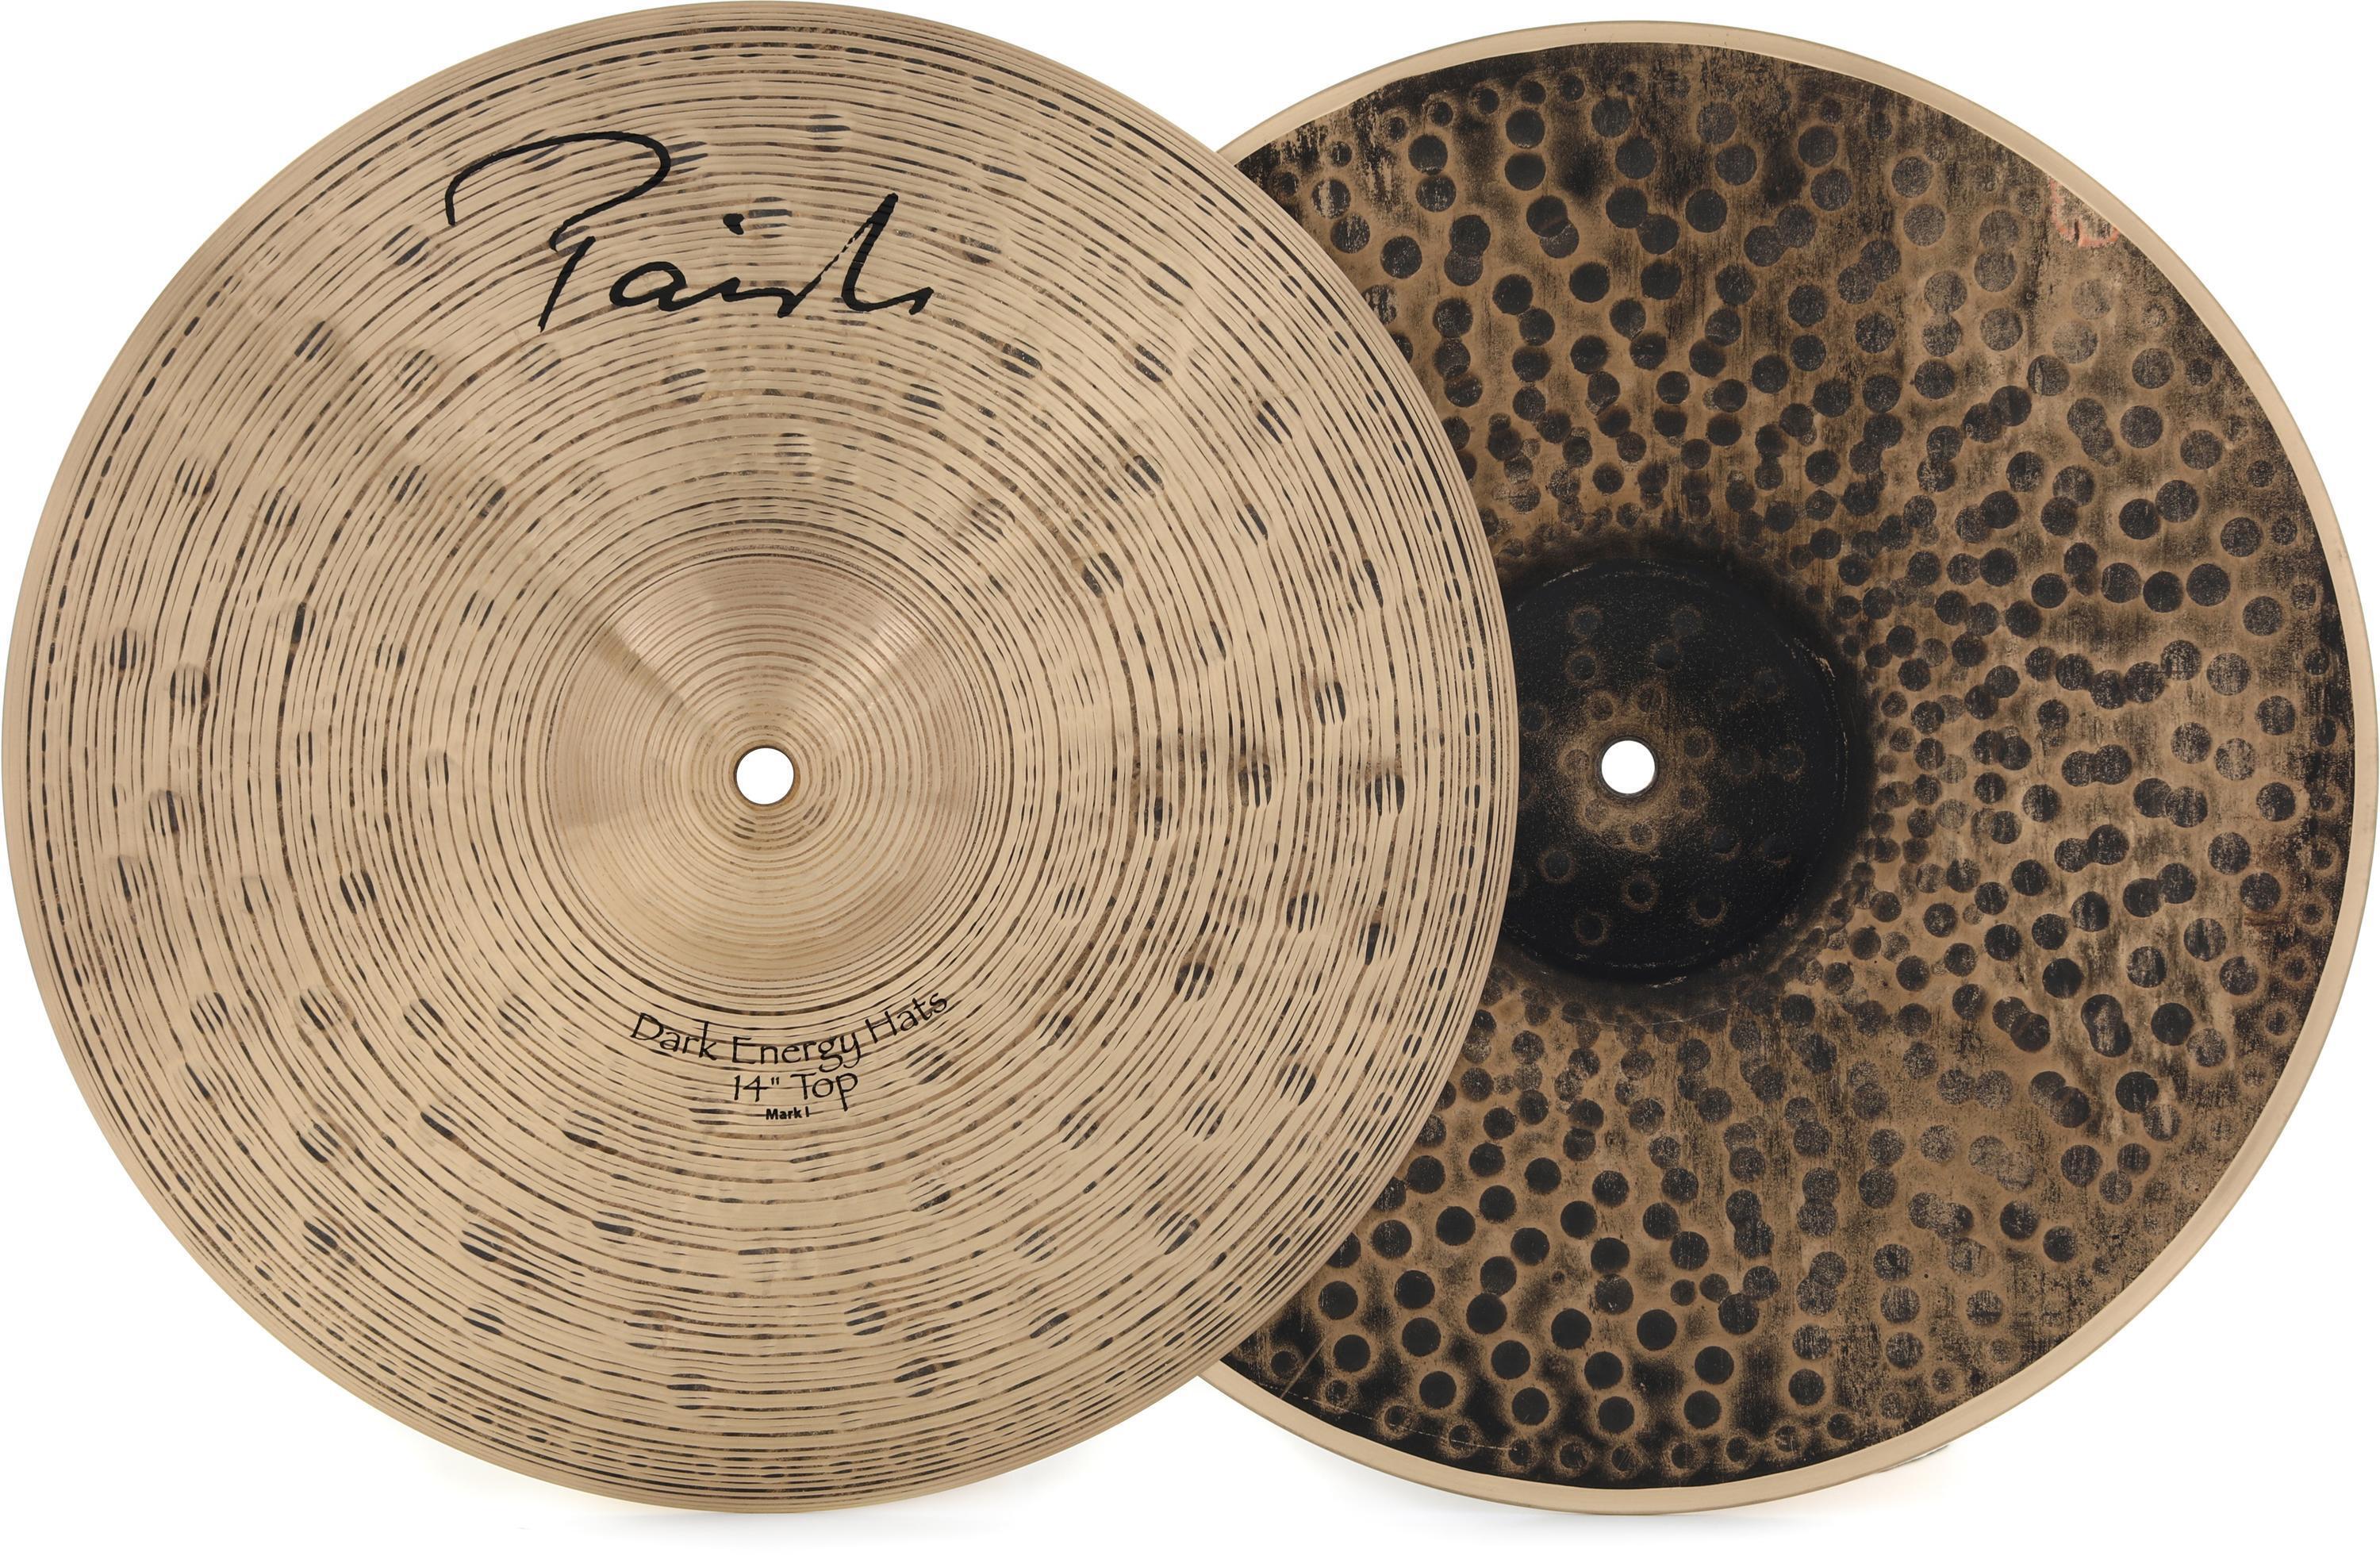 Meinl Cymbals 14 inch Byzance Foundry Reserve Hi-hat Cymbals 